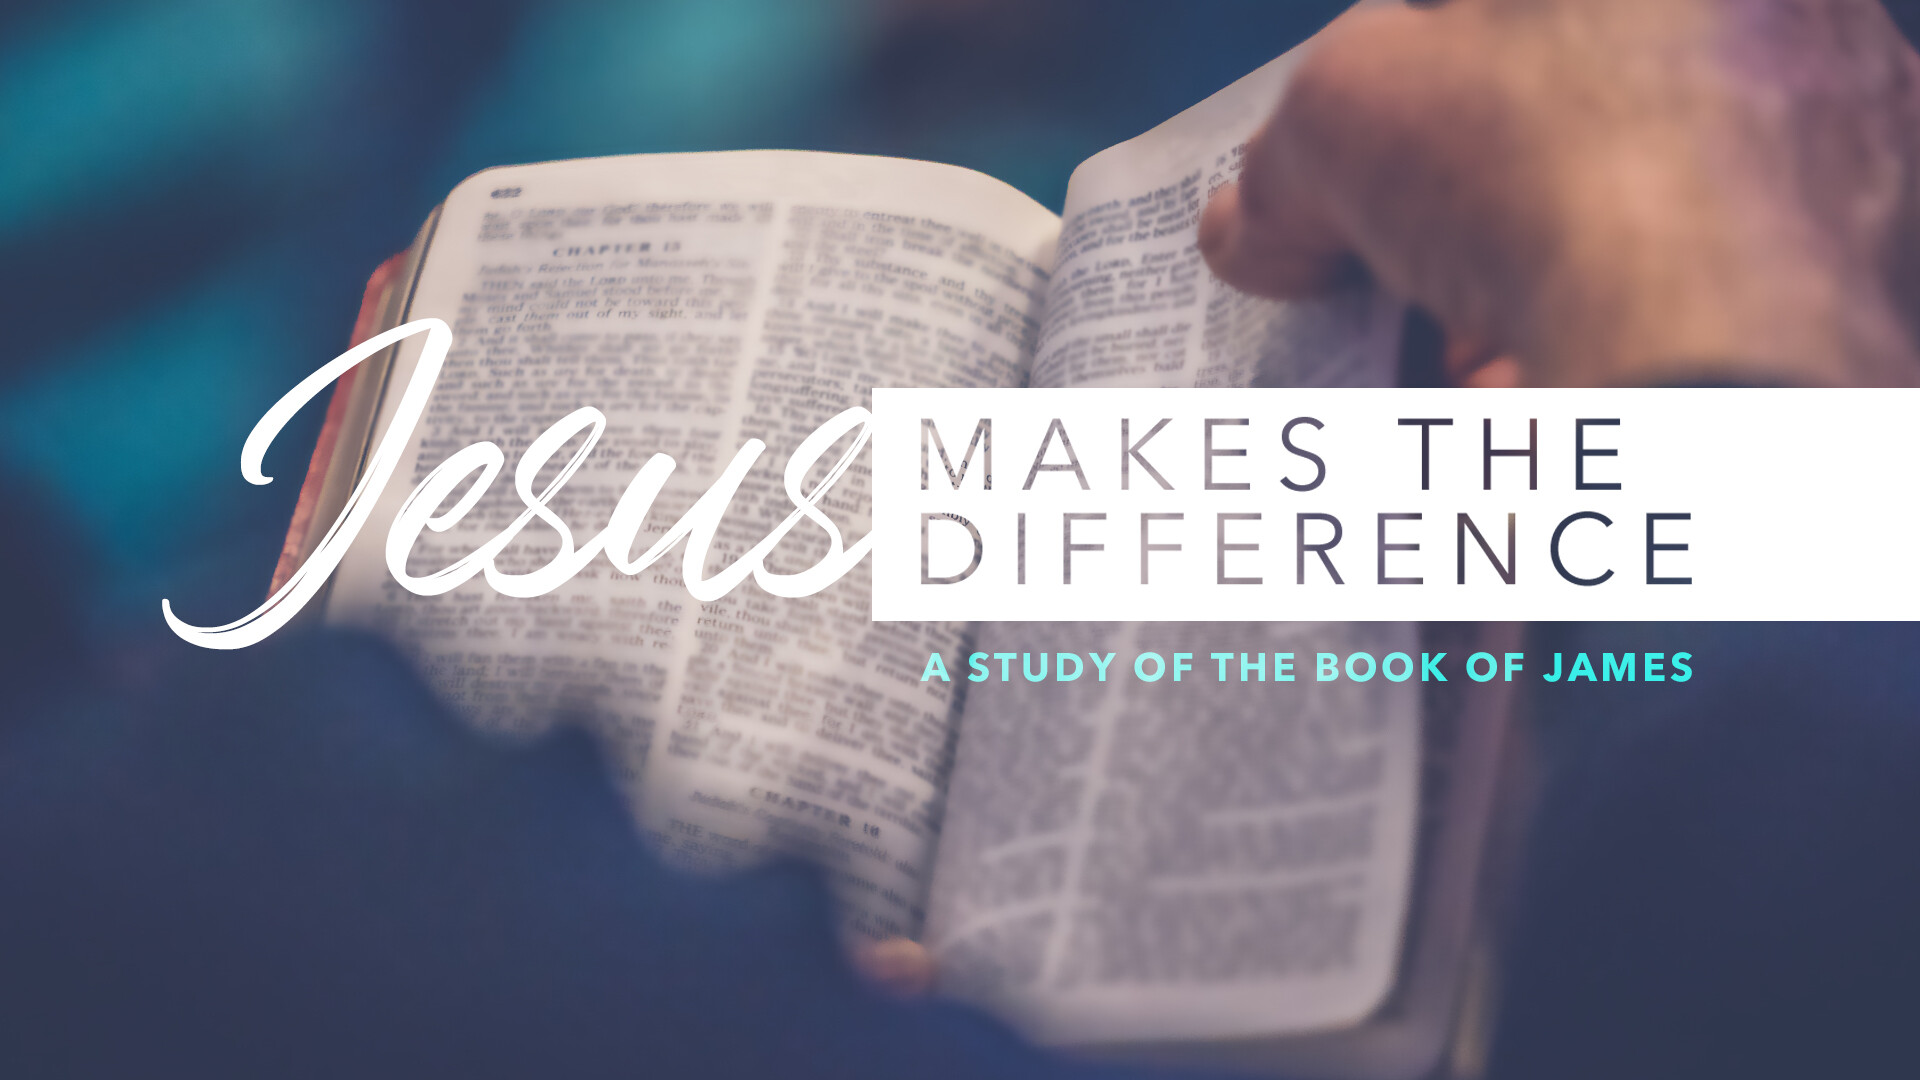 Is it Inspiring - Jesus Makes the Difference